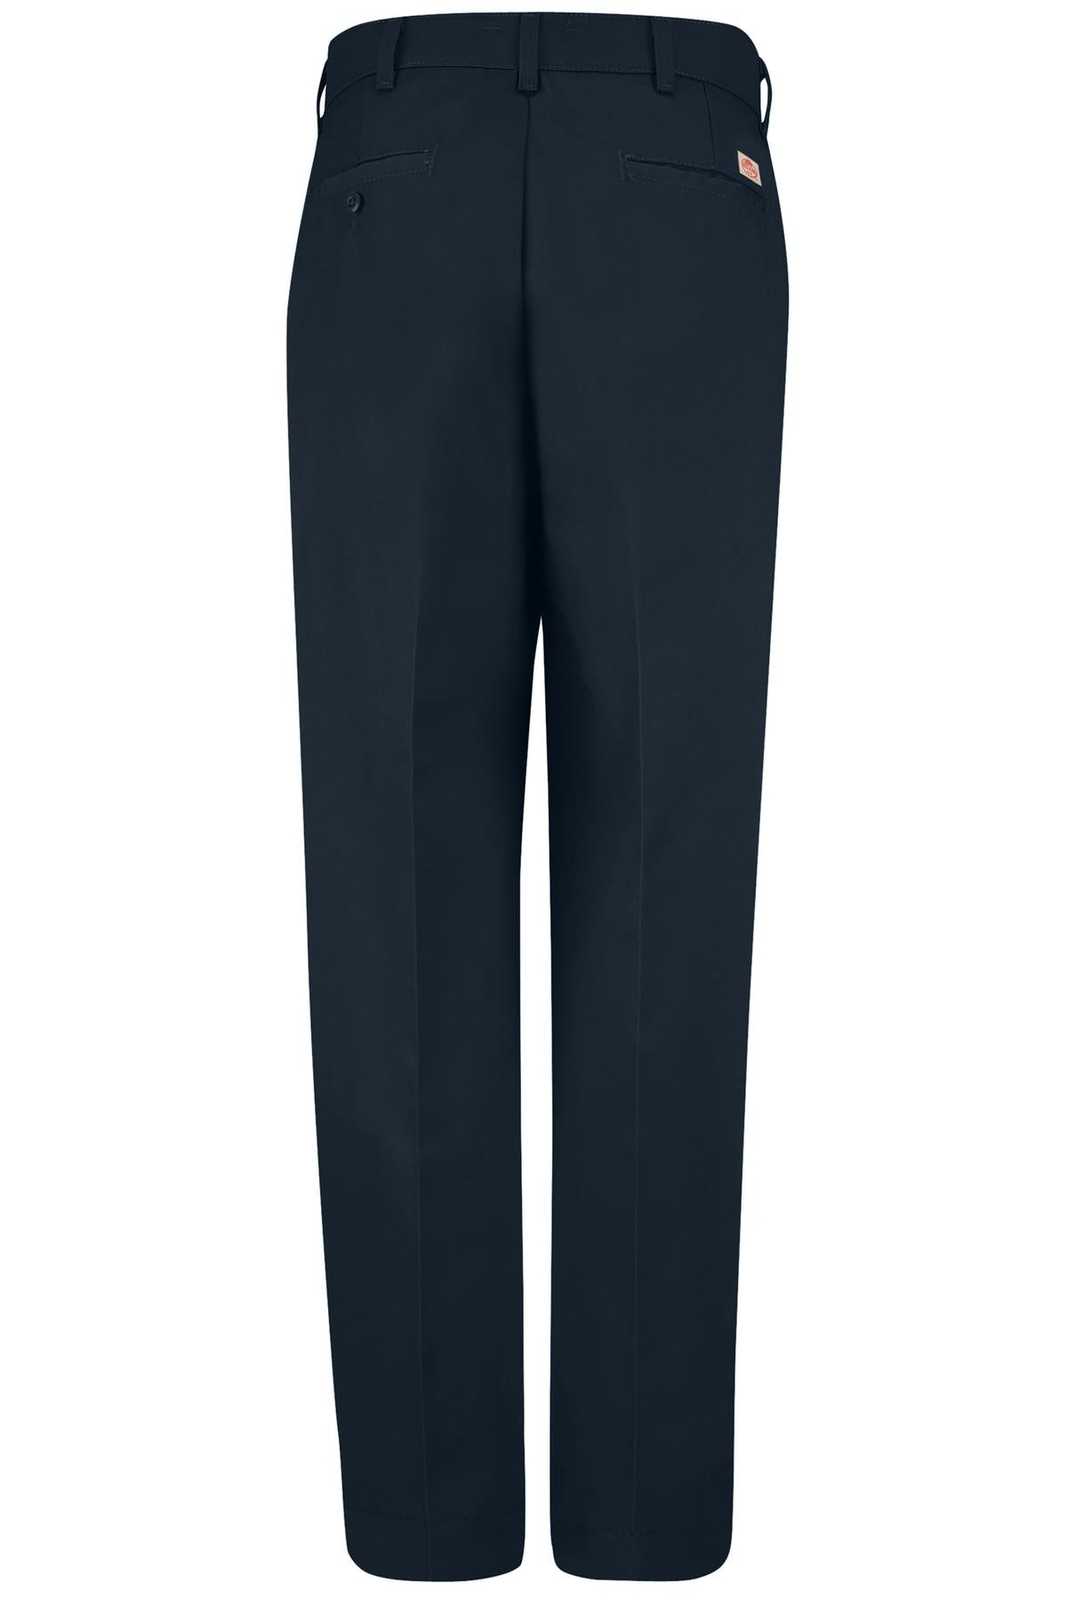 Red Kap PT20 Industrial Work Pant - Navy - HIT a Double - 3